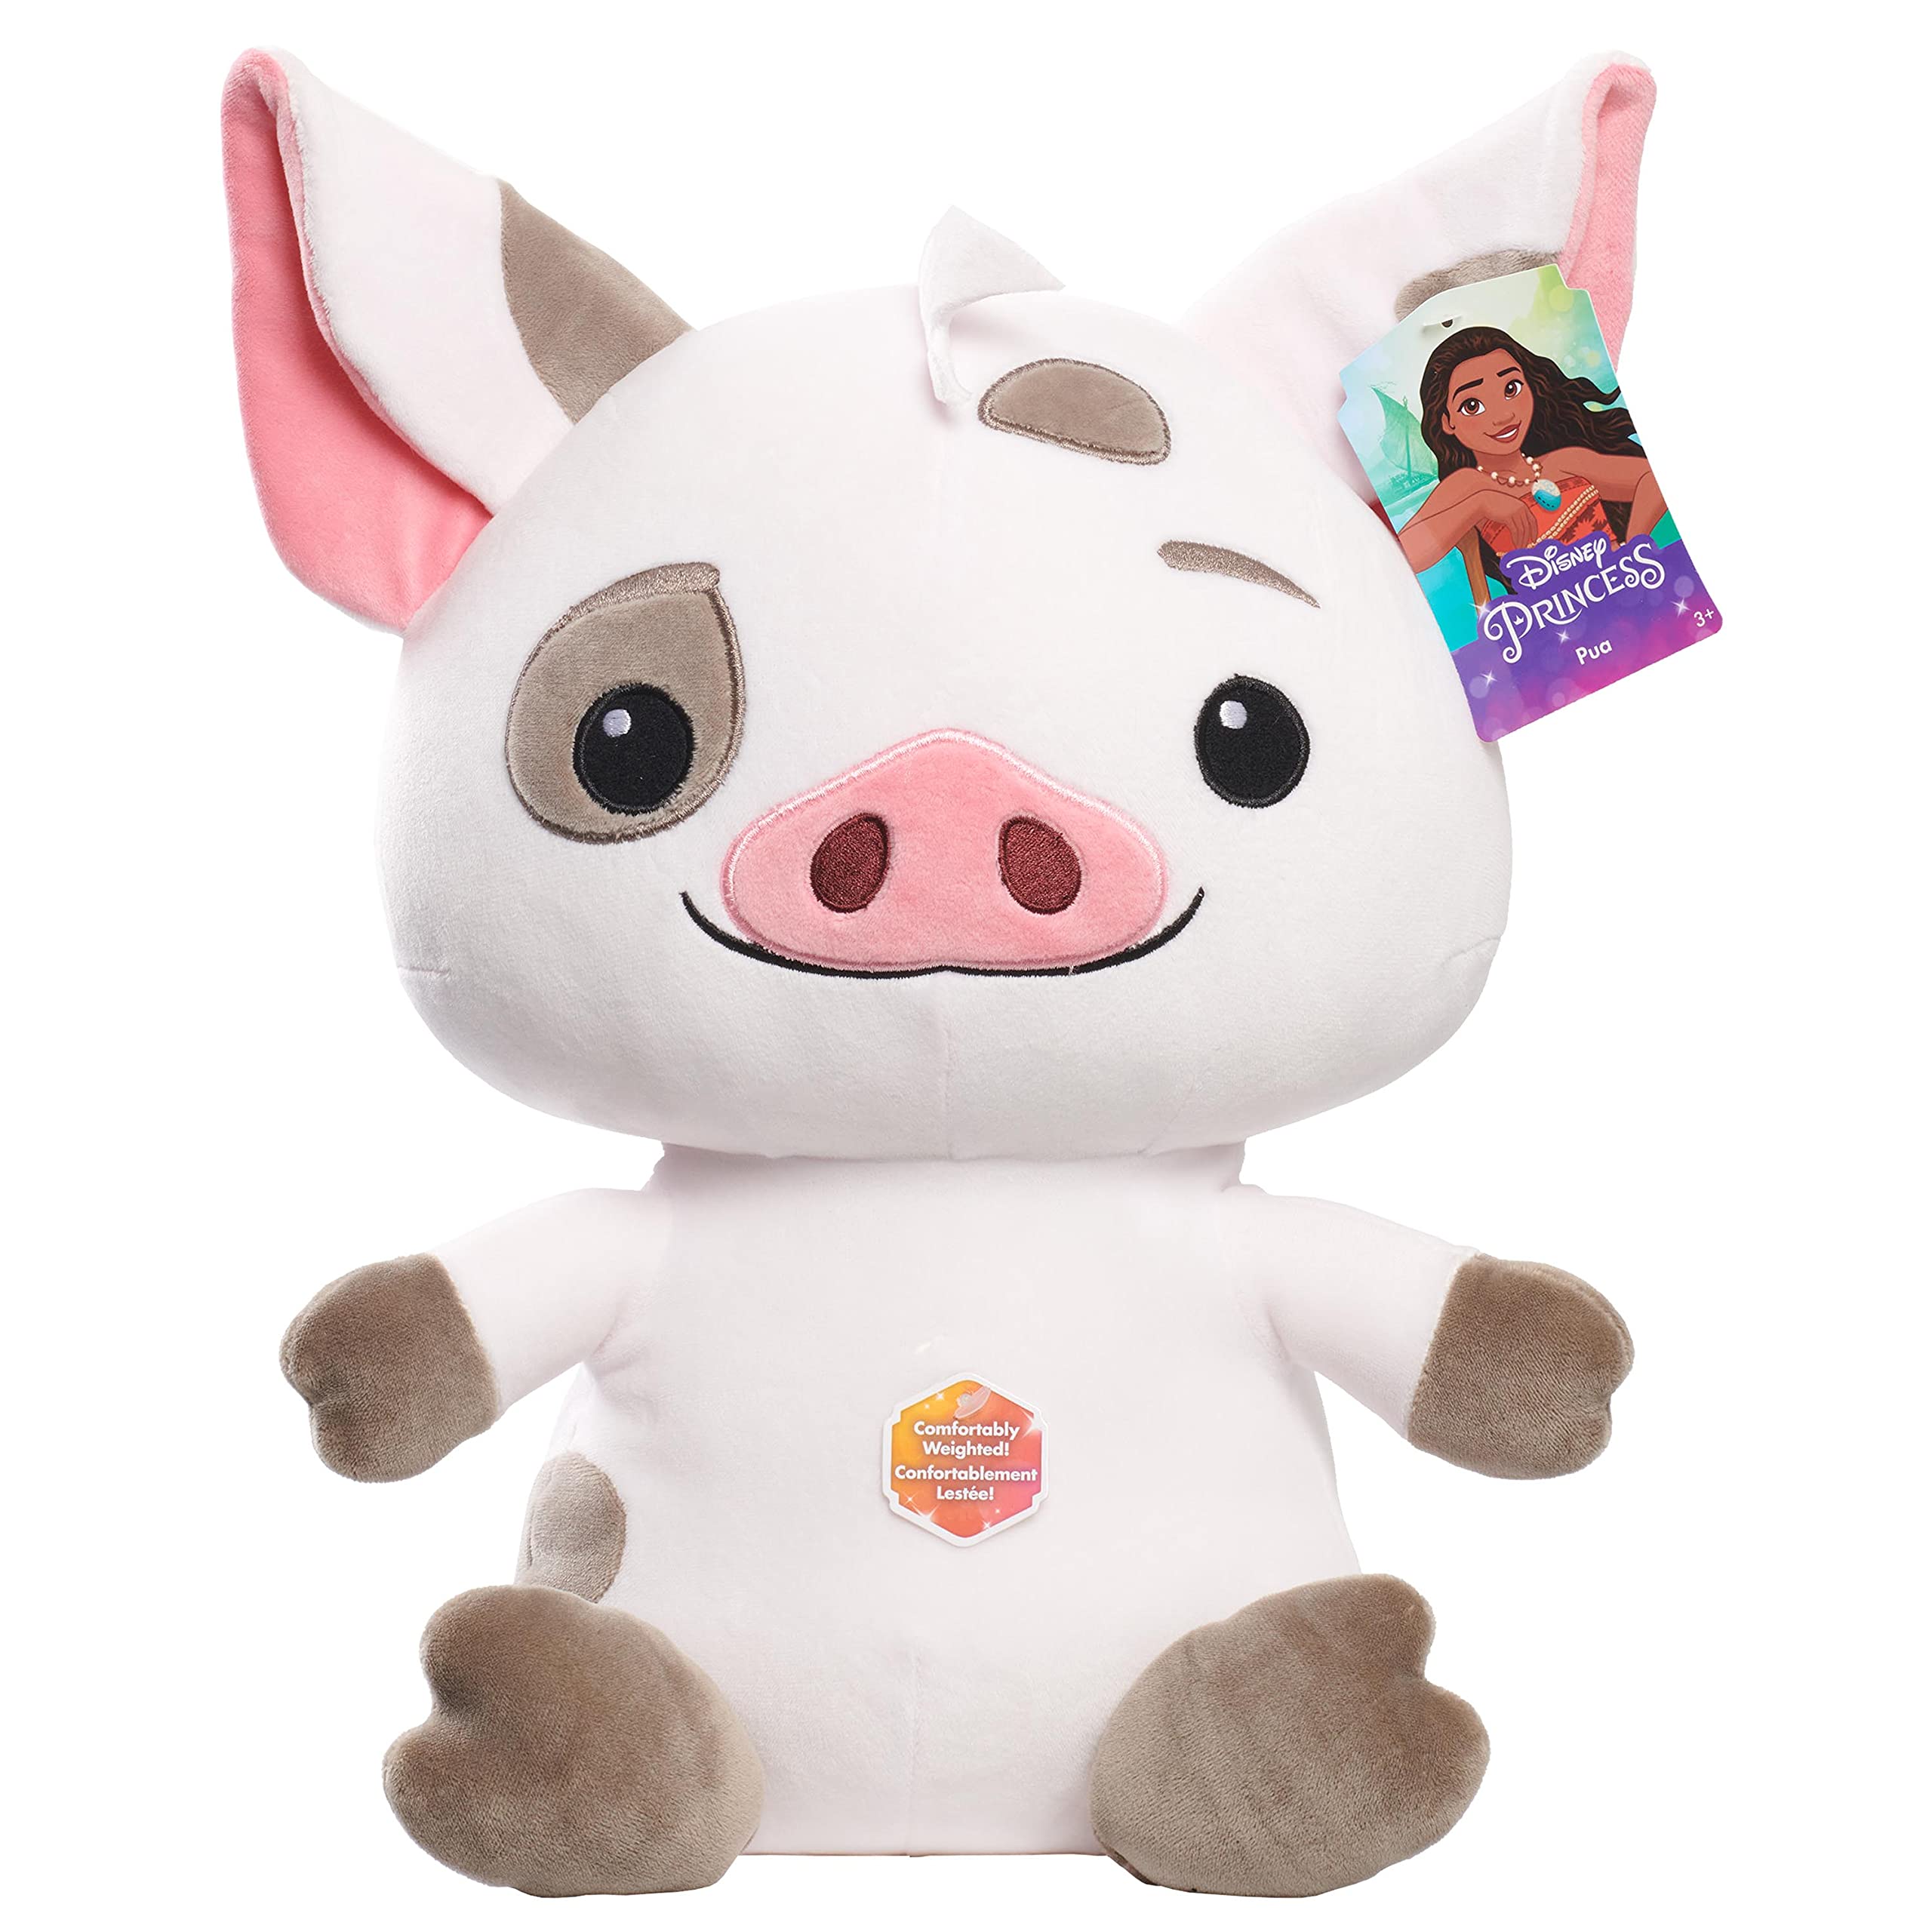 Disney Princess Moana Pua 14-Inch Weighted Plushie Stuffed Animal, Pig, Approximately 2 Pounds, Officially Licensed Kids Toys for Ages 3 Up, Gifts and Presents by Just Play